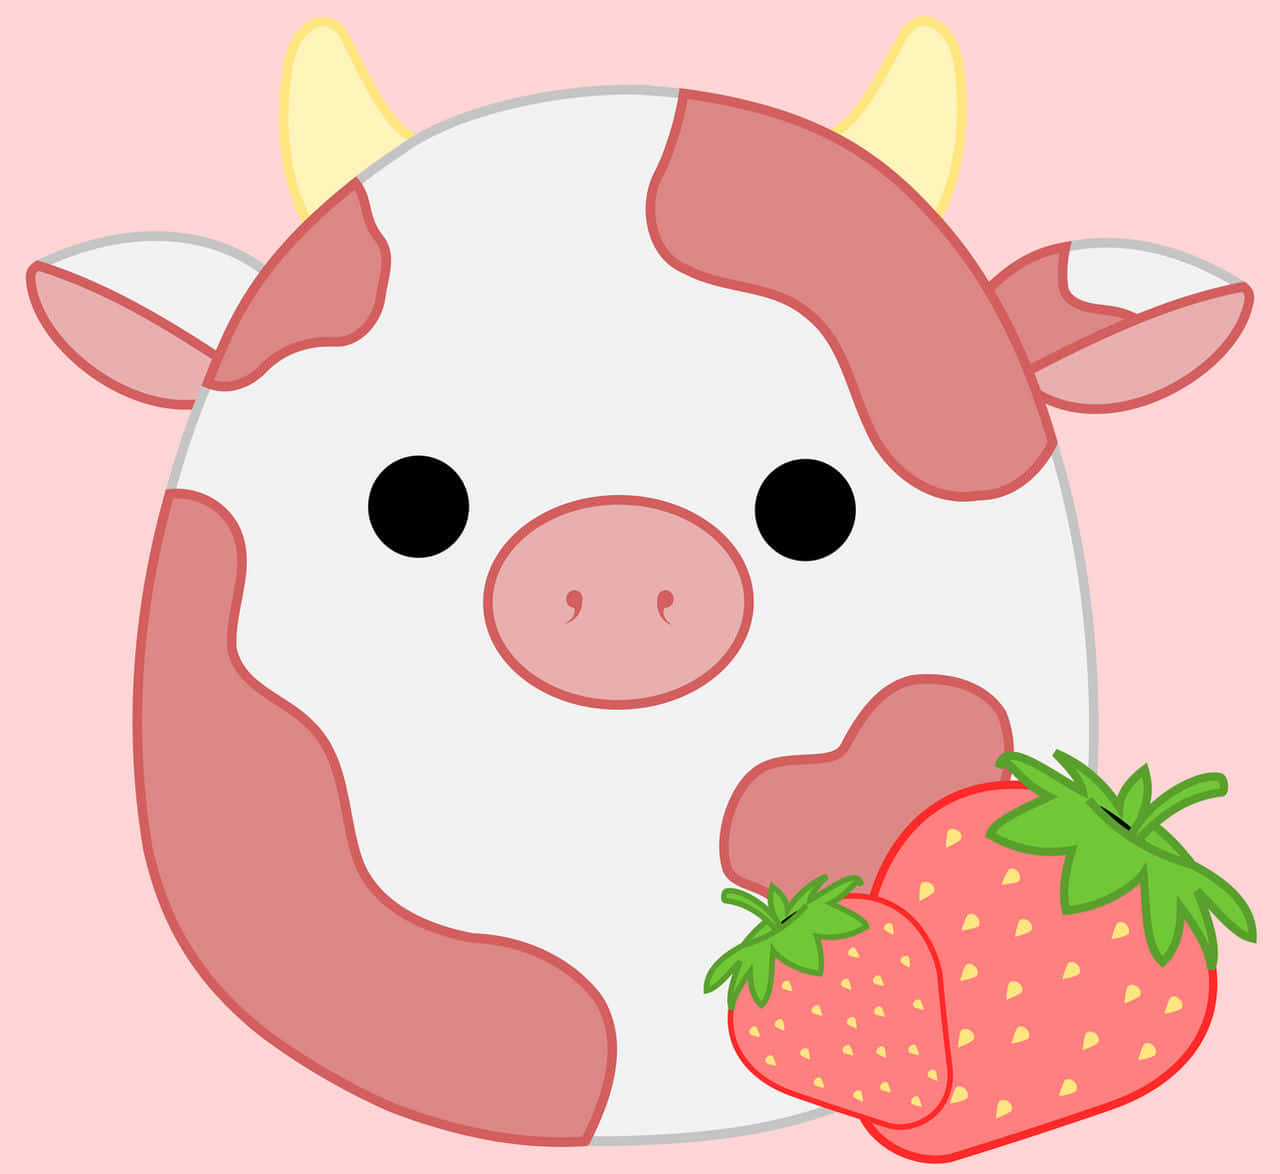 Download Adorable Strawberry Cow Wallpaper | Wallpapers.com